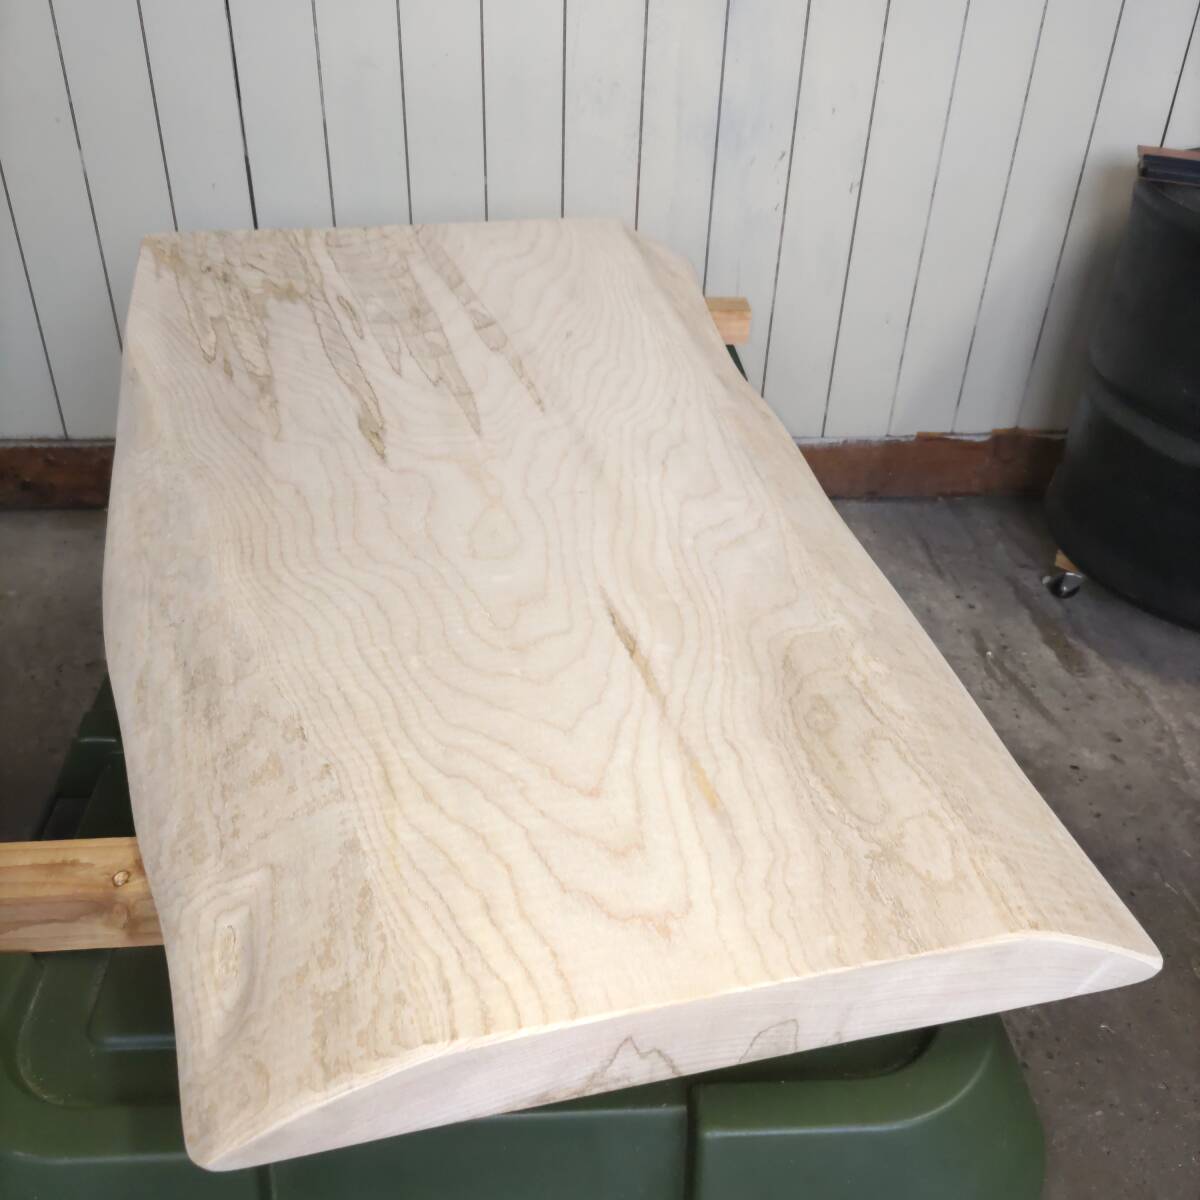 i Taya maple maple approximately length 900 width 380~500 thickness 45 millimeter made material after approximately half year ear attaching board one sheets board natural tree purity not yet dry stand for flower vase many meat shelves table board 